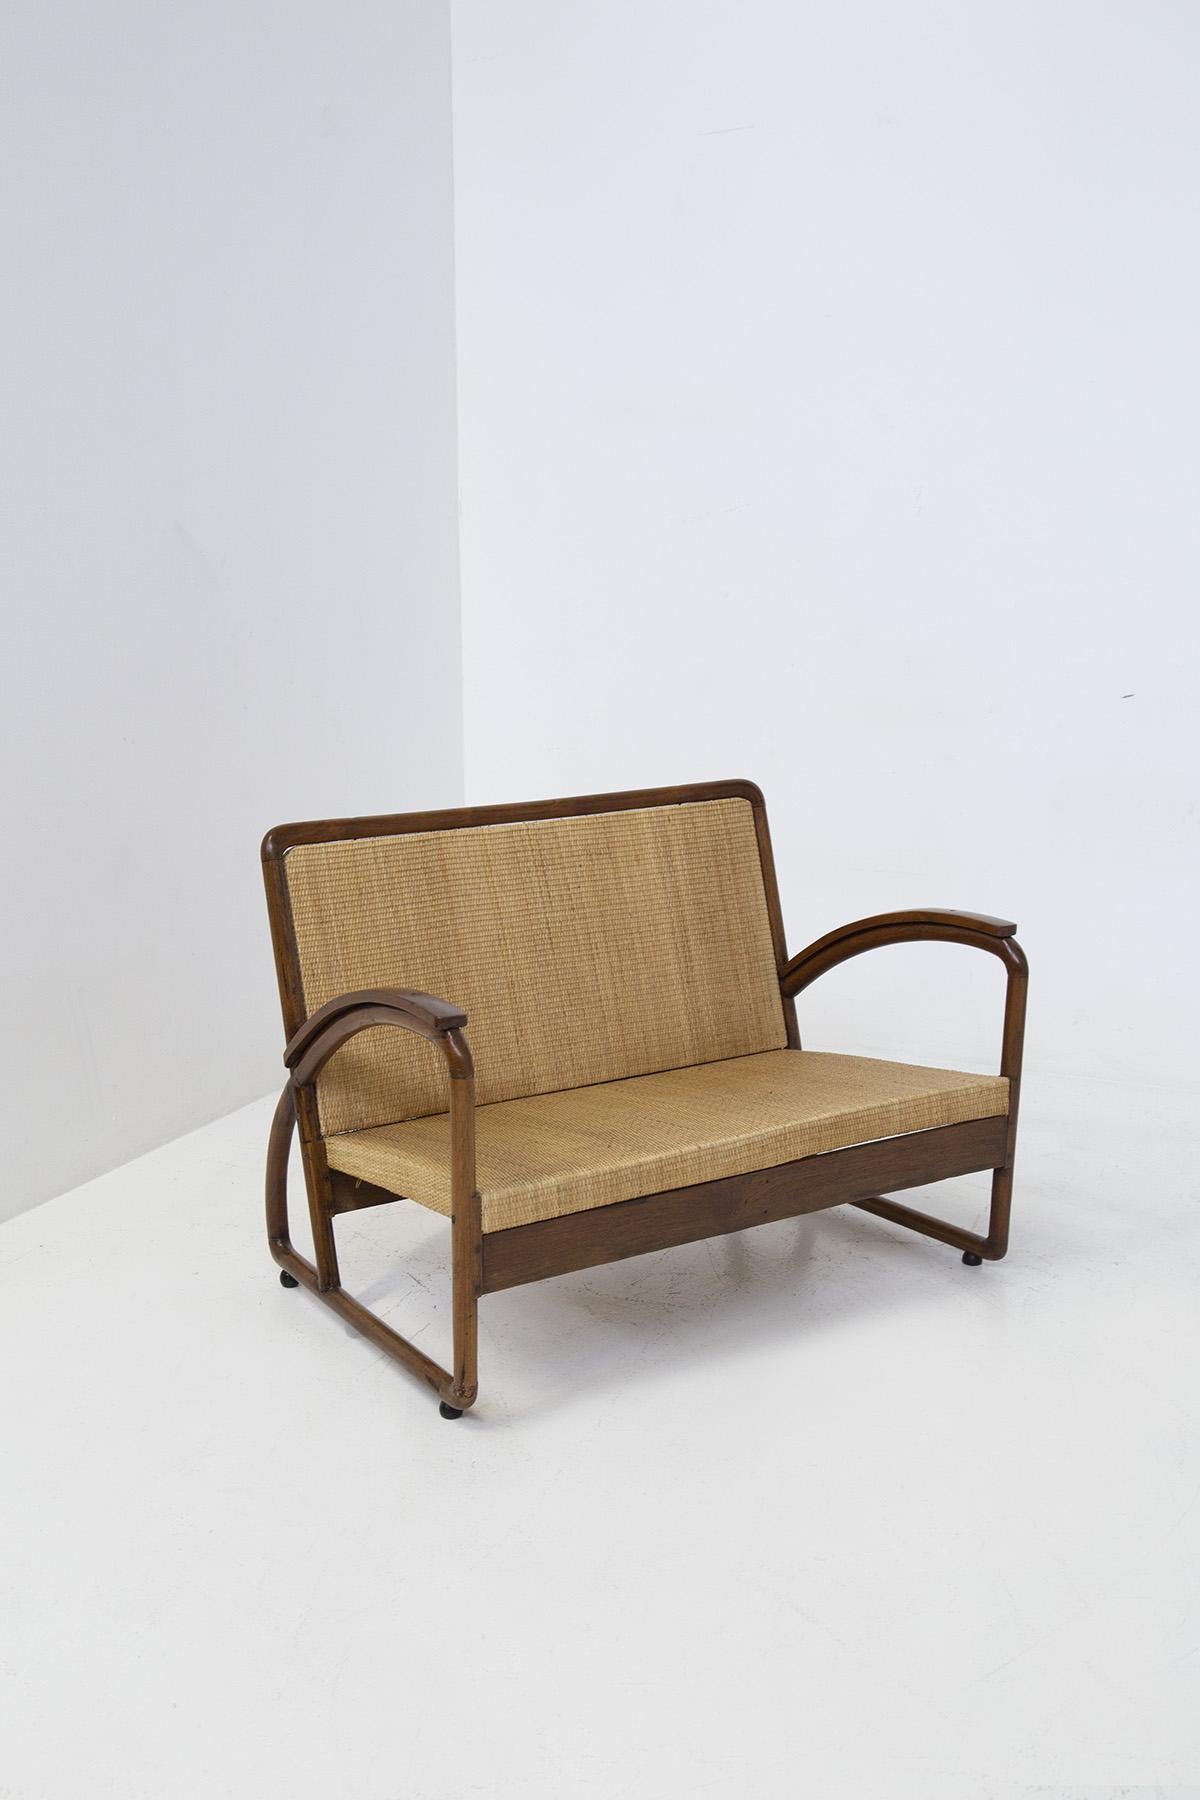 Beautiful loveseat from the Italian rationalist period of the 1920s.
The loveseat was made from fine wood for the frame and rattan for the seat and back. 
Its bold, sharp and enveloping forms are precisely to be attributed to the historical period